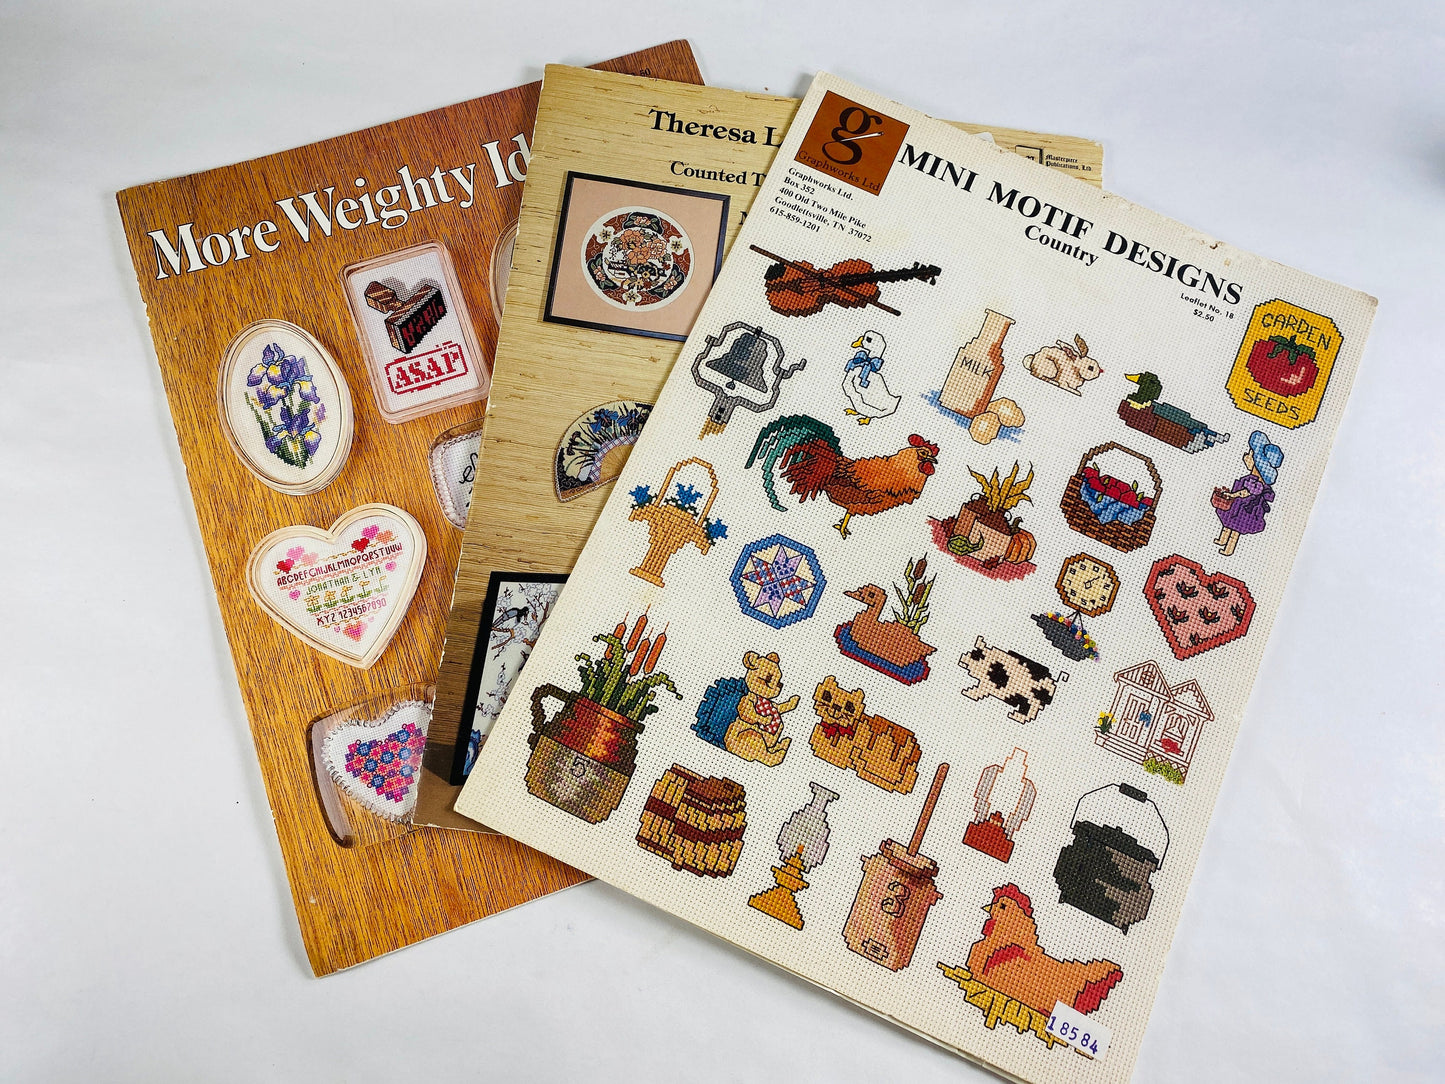 Vintage lot of needlepoint stitches motifs and patterns from the 1970s-1980s embroidery instructions cross stitch mini